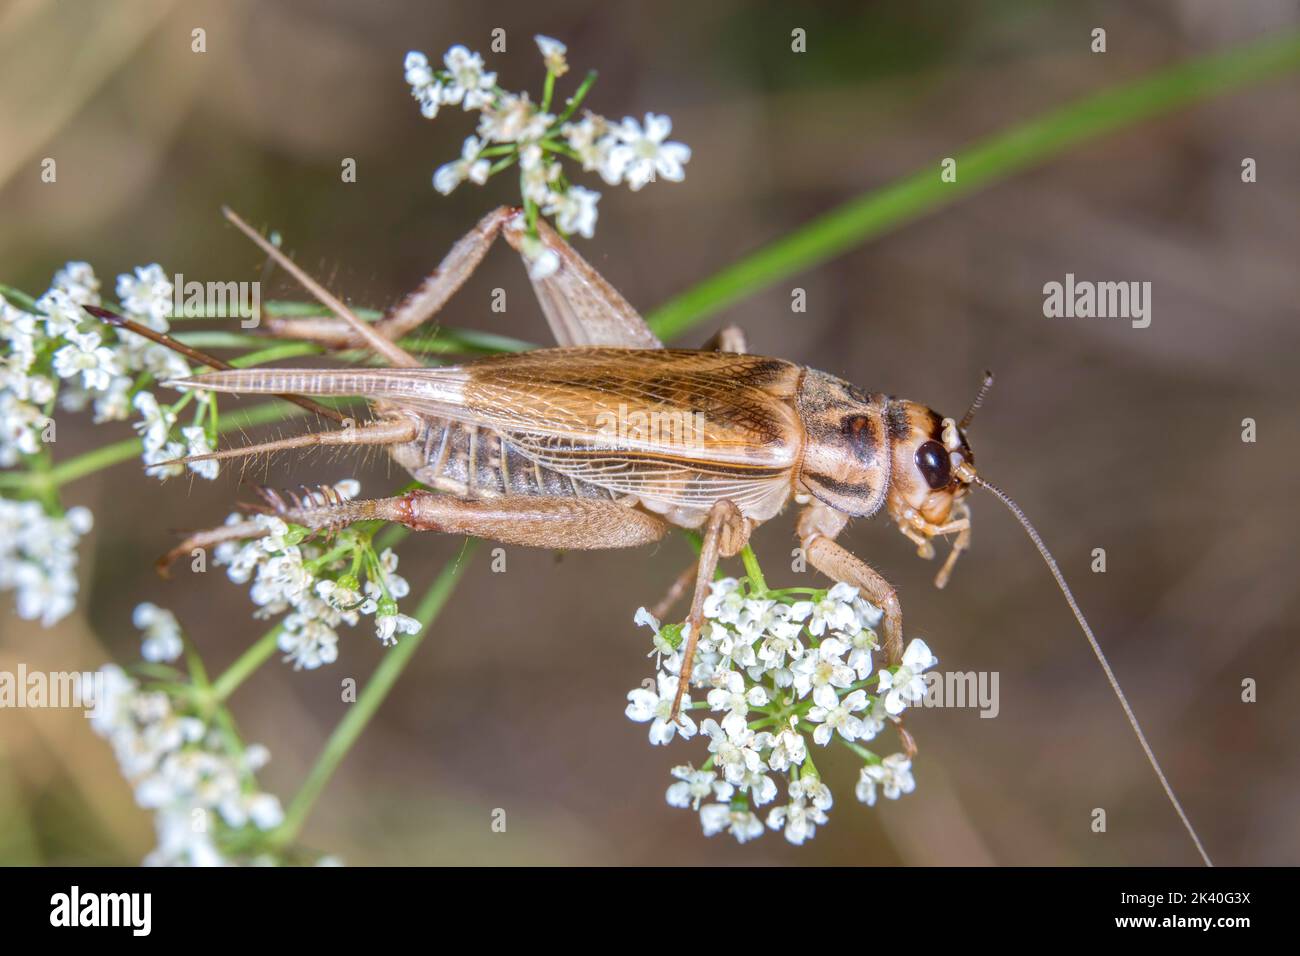 House cricket, Domestic cricket, Domestic gray cricket (Acheta domesticus, Acheta domestica, Gryllulus domesticus), female on an inflorescence, Stock Photo